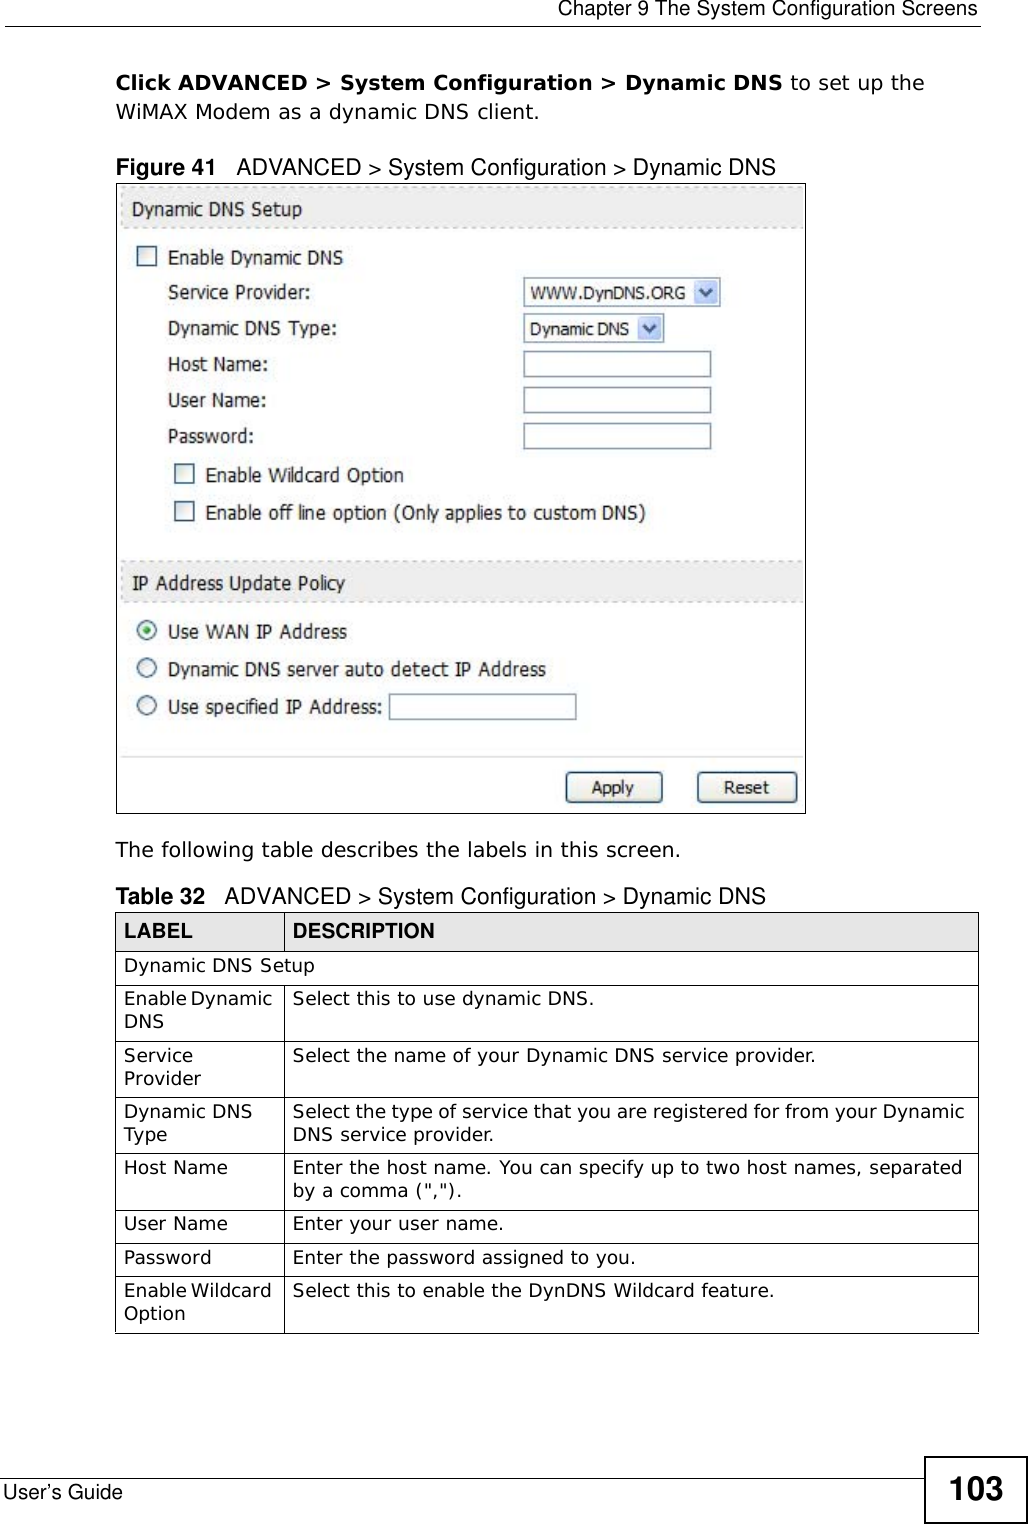  Chapter 9 The System Configuration ScreensUser’s Guide 103Click ADVANCED &gt; System Configuration &gt; Dynamic DNS to set up the WiMAX Modem as a dynamic DNS client.Figure 41   ADVANCED &gt; System Configuration &gt; Dynamic DNSThe following table describes the labels in this screen.Table 32   ADVANCED &gt; System Configuration &gt; Dynamic DNSLABEL DESCRIPTIONDynamic DNS SetupEnable Dynamic DNS Select this to use dynamic DNS.Service Provider Select the name of your Dynamic DNS service provider.Dynamic DNS Type Select the type of service that you are registered for from your Dynamic DNS service provider.Host Name Enter the host name. You can specify up to two host names, separated by a comma (&quot;,&quot;).User Name Enter your user name.Password Enter the password assigned to you.Enable Wildcard Option Select this to enable the DynDNS Wildcard feature.